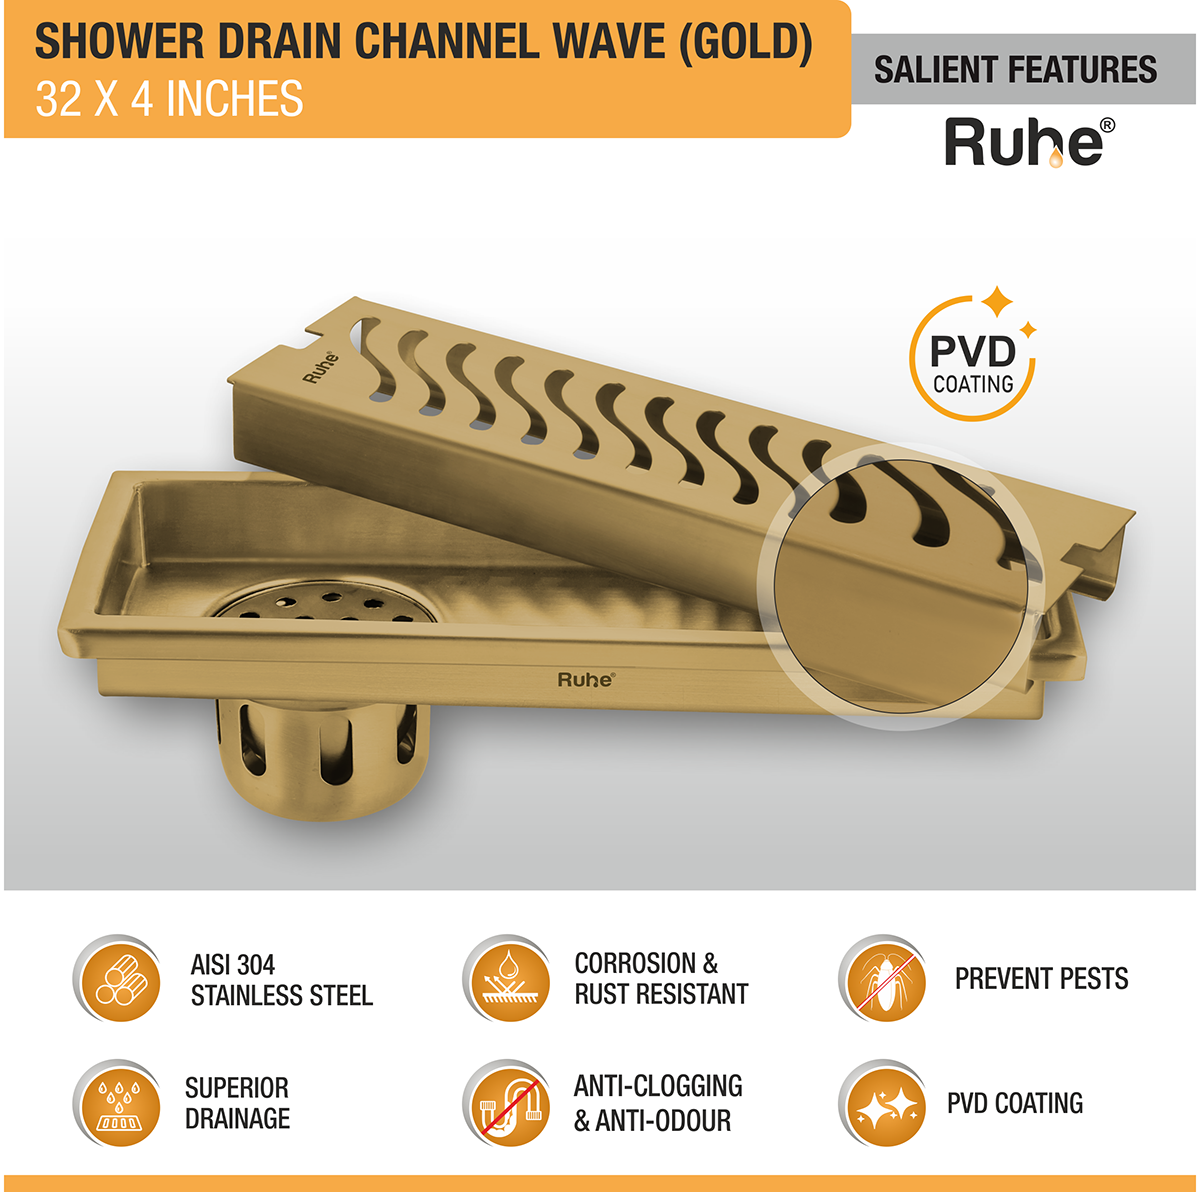 Wave Shower Drain Channel (32 x 4 Inches) YELLOW GOLD features